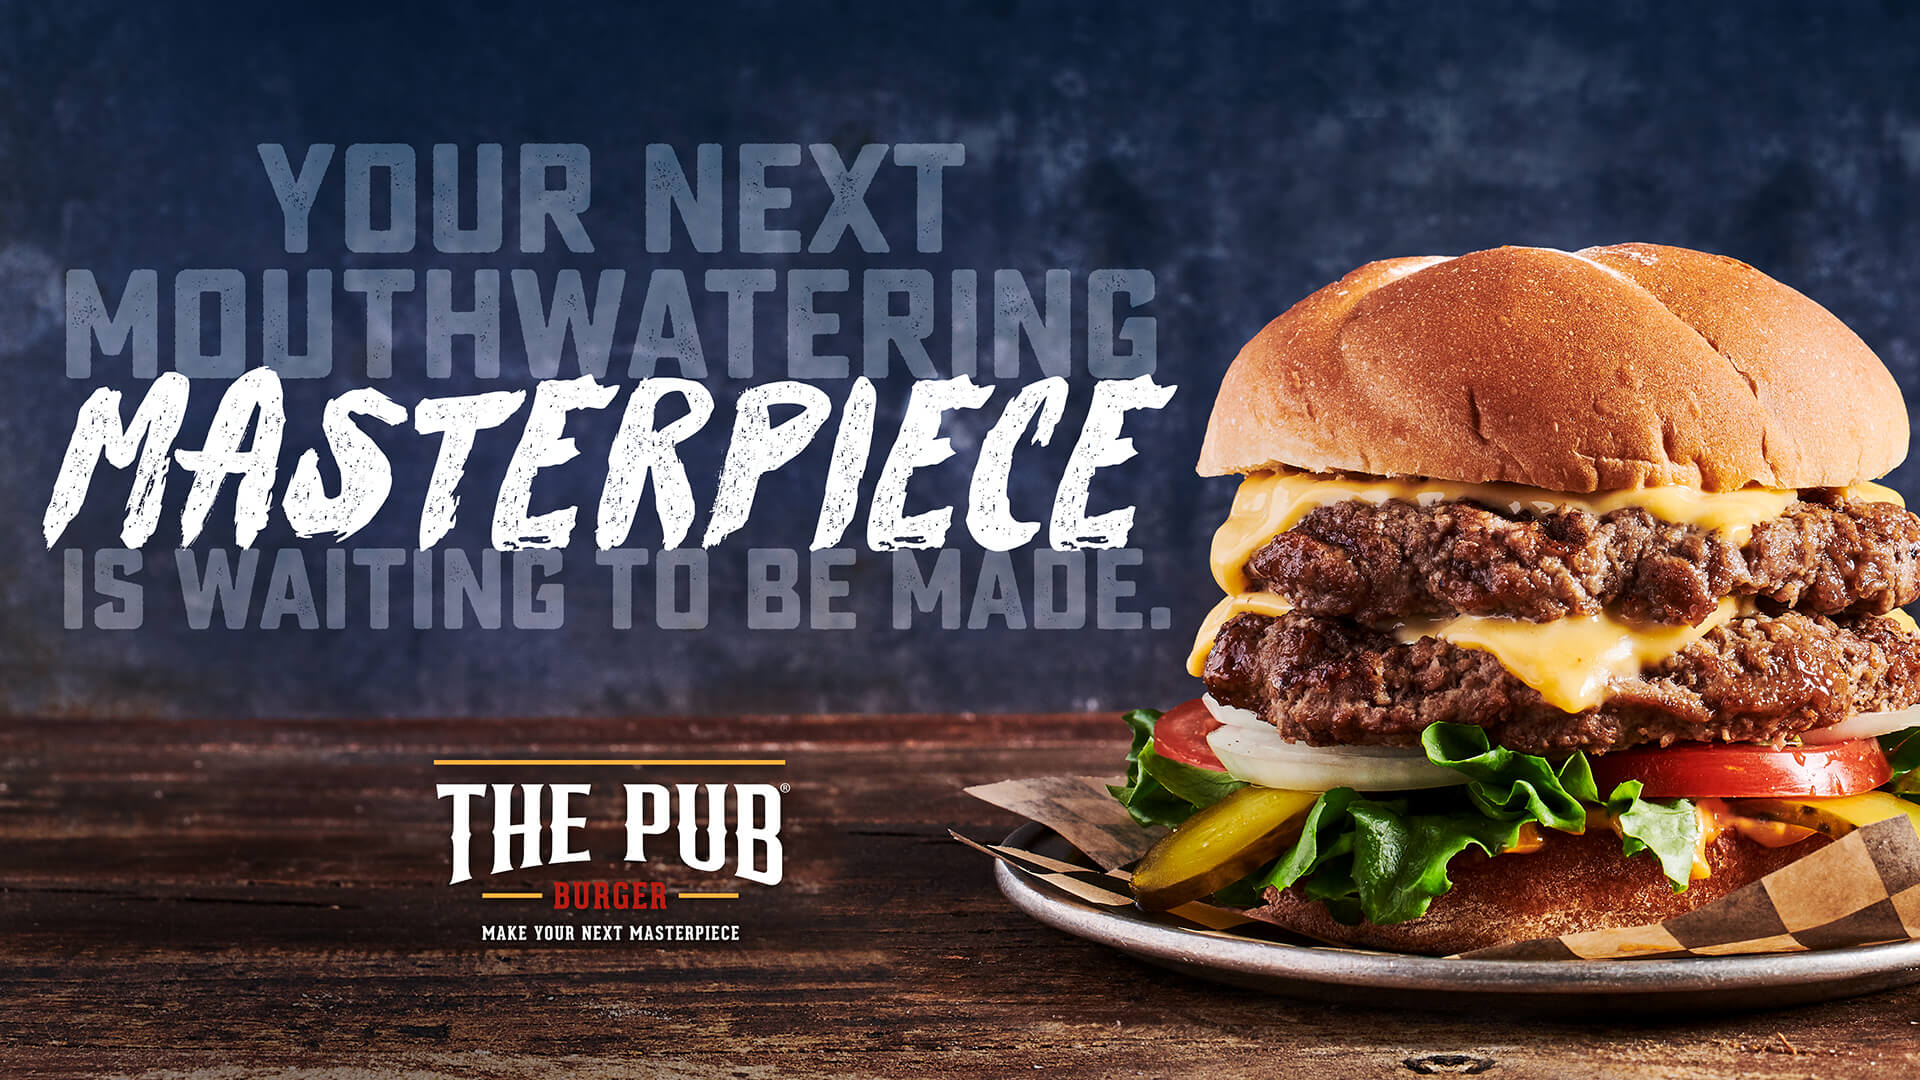 The Pub® burger image on a table. Your next mouthwatering masterpiece is waiting to be made. Beef Rebrand.